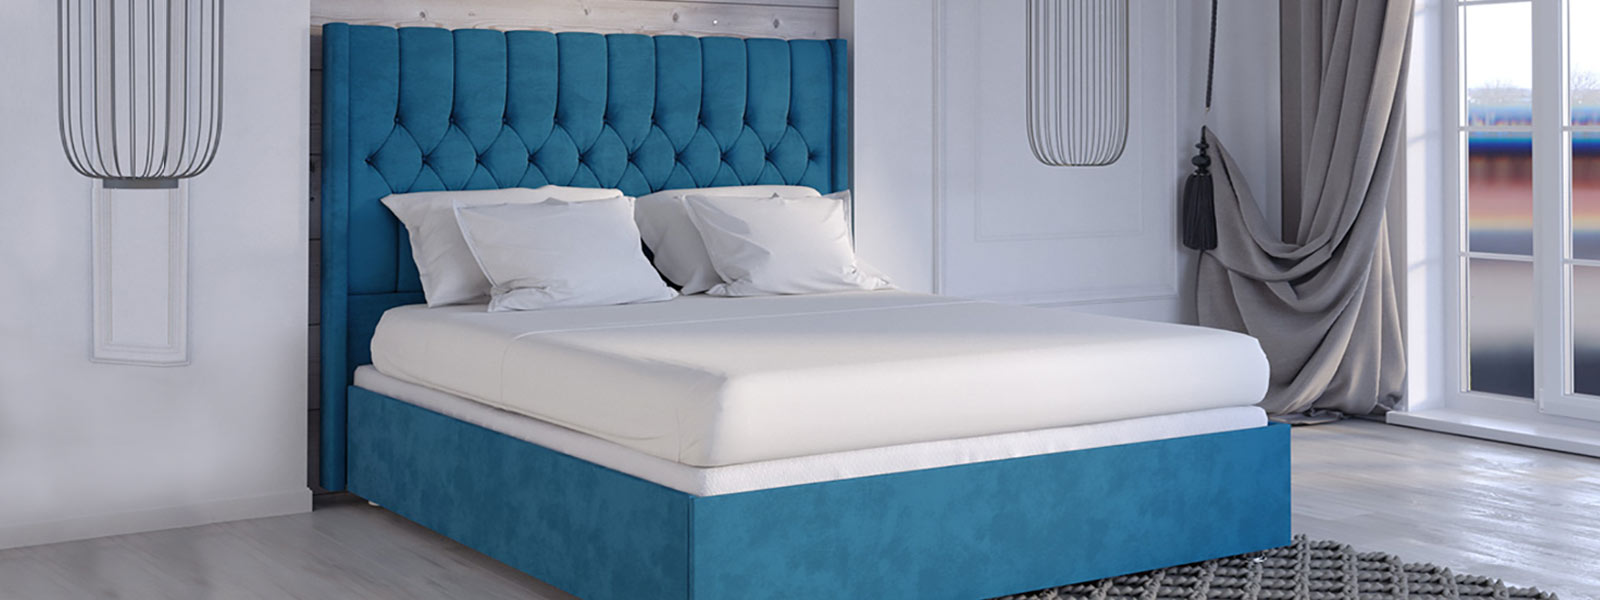 Bedroom set and mattress from Canada Sleep Paradise